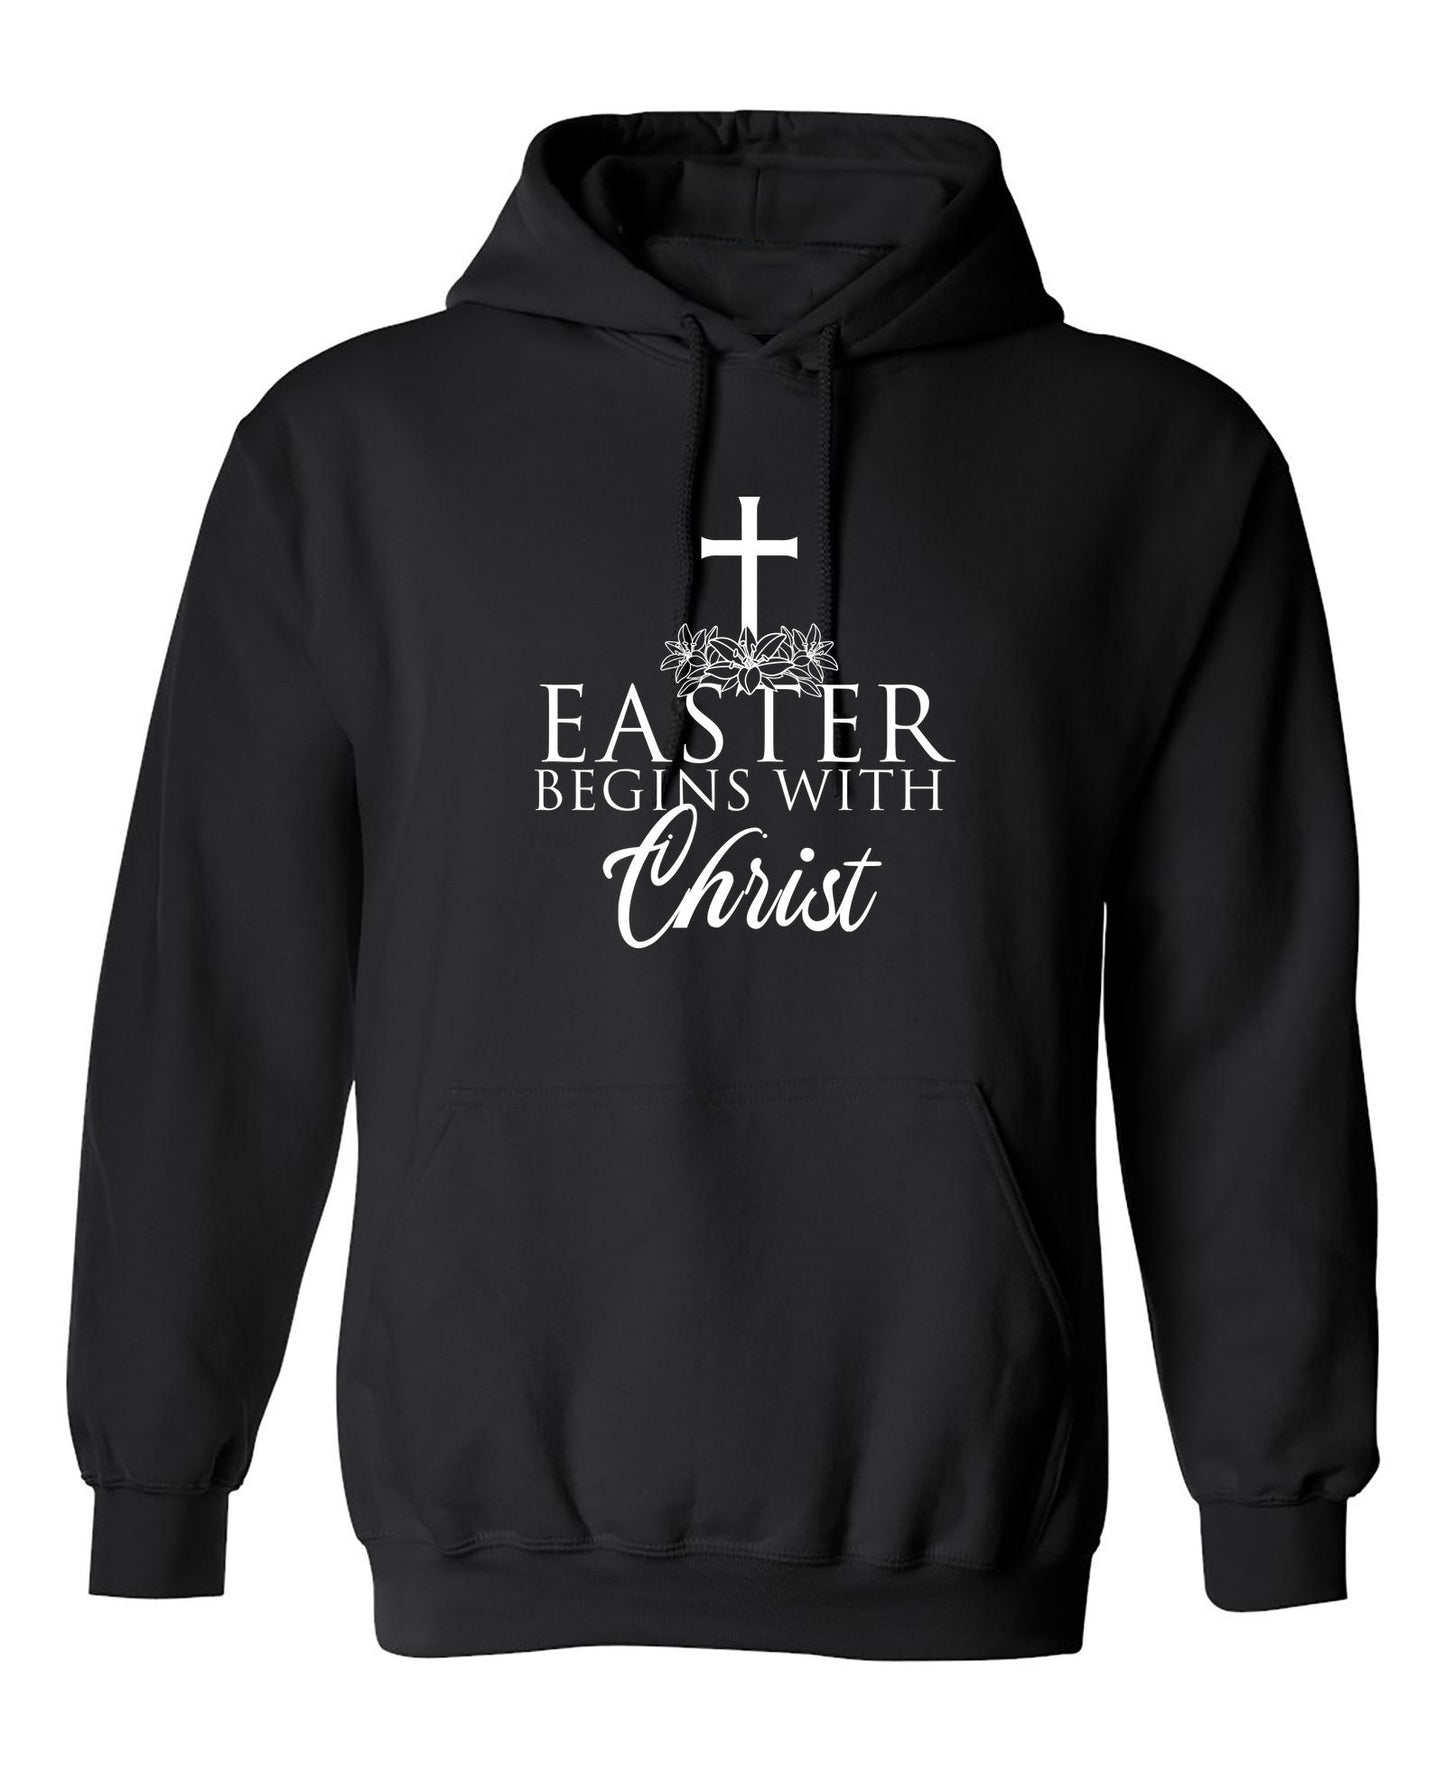 Funny T-Shirts design "Easter Begins With Christ"